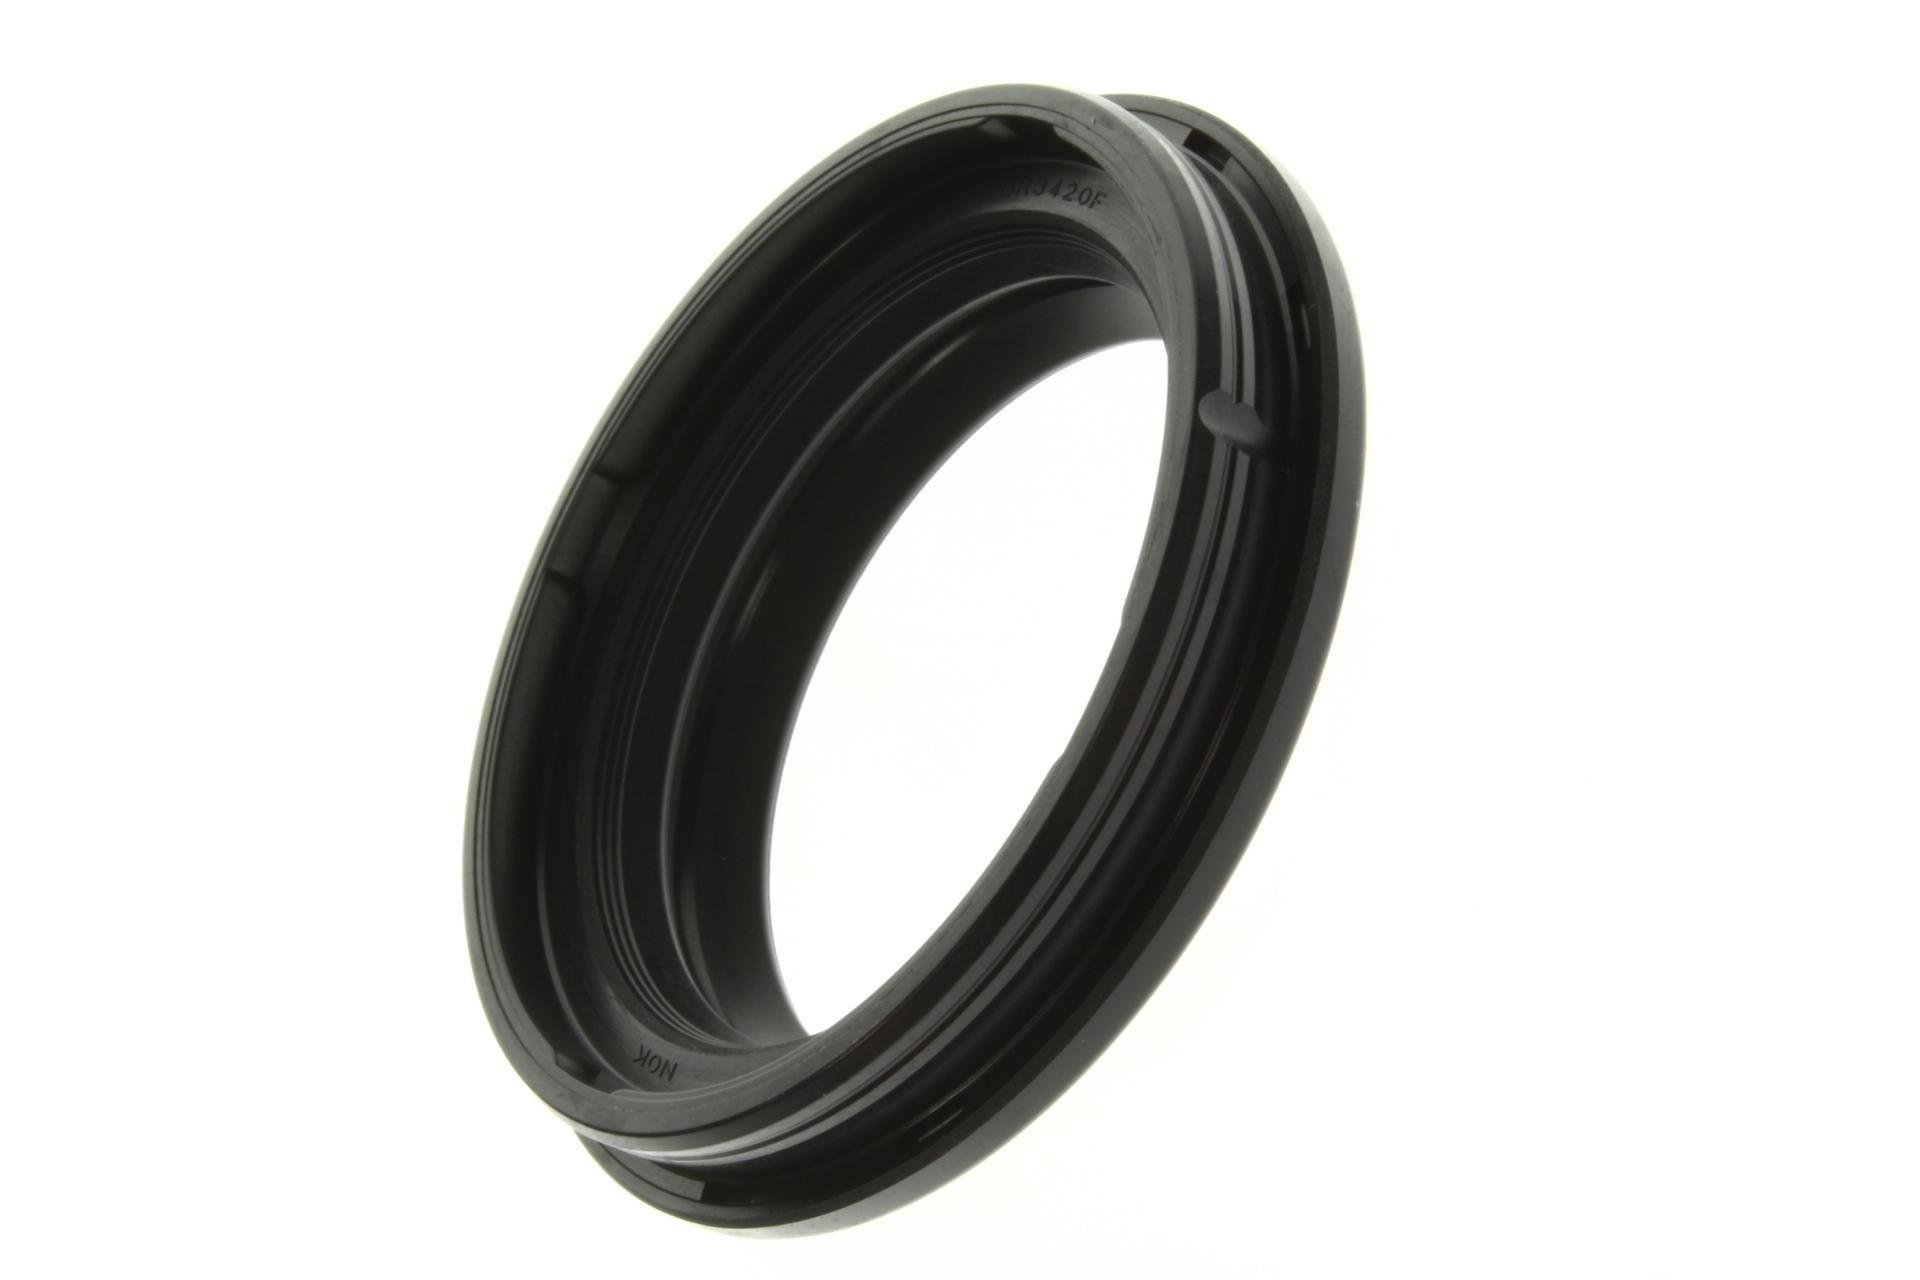 91254-MB4-003 DUST SEAL